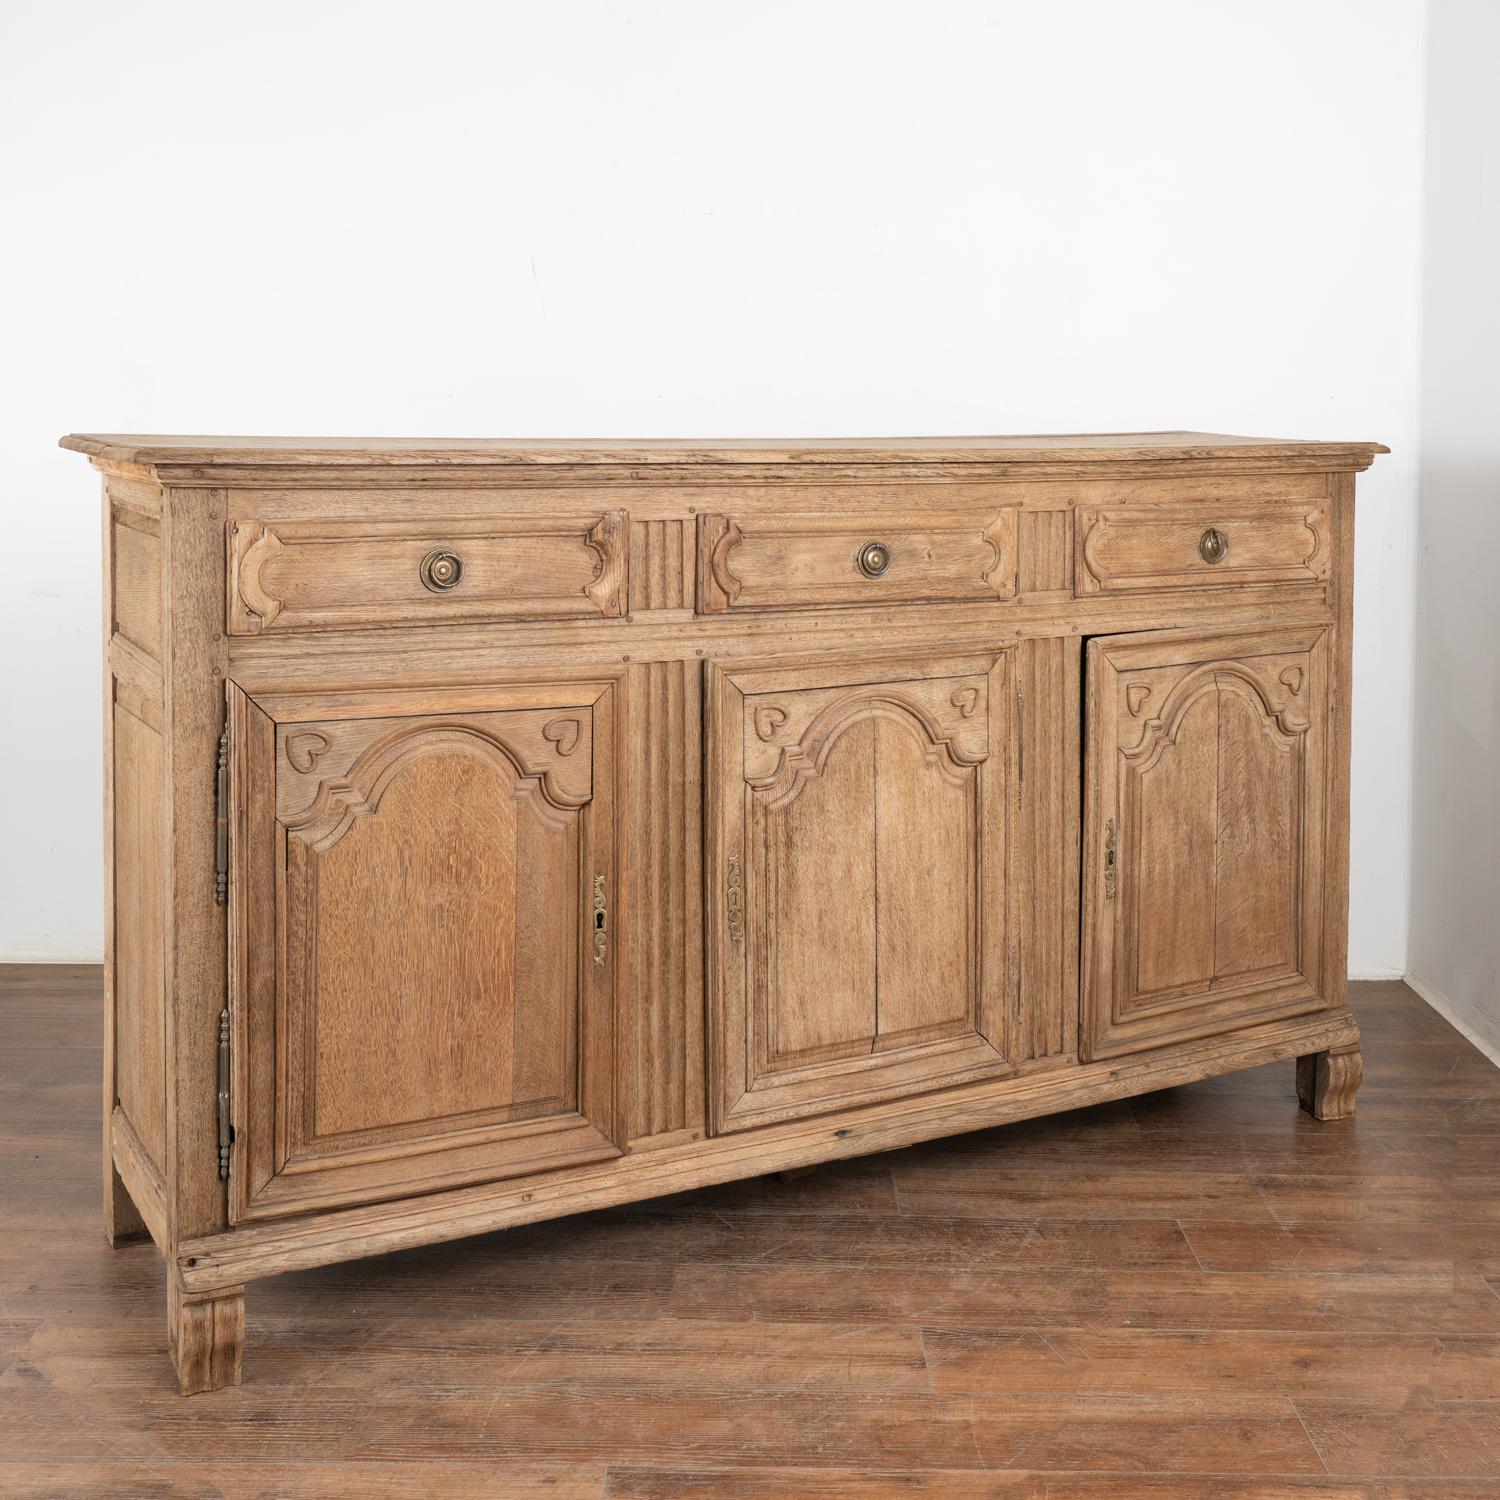 It is the lovely carved details and heavily paneled drawers and doors that draws one to this French oak sideboard which has been bleached giving it a lighter finish for today's modern home.
The panel doors are accented with two small hearts in the